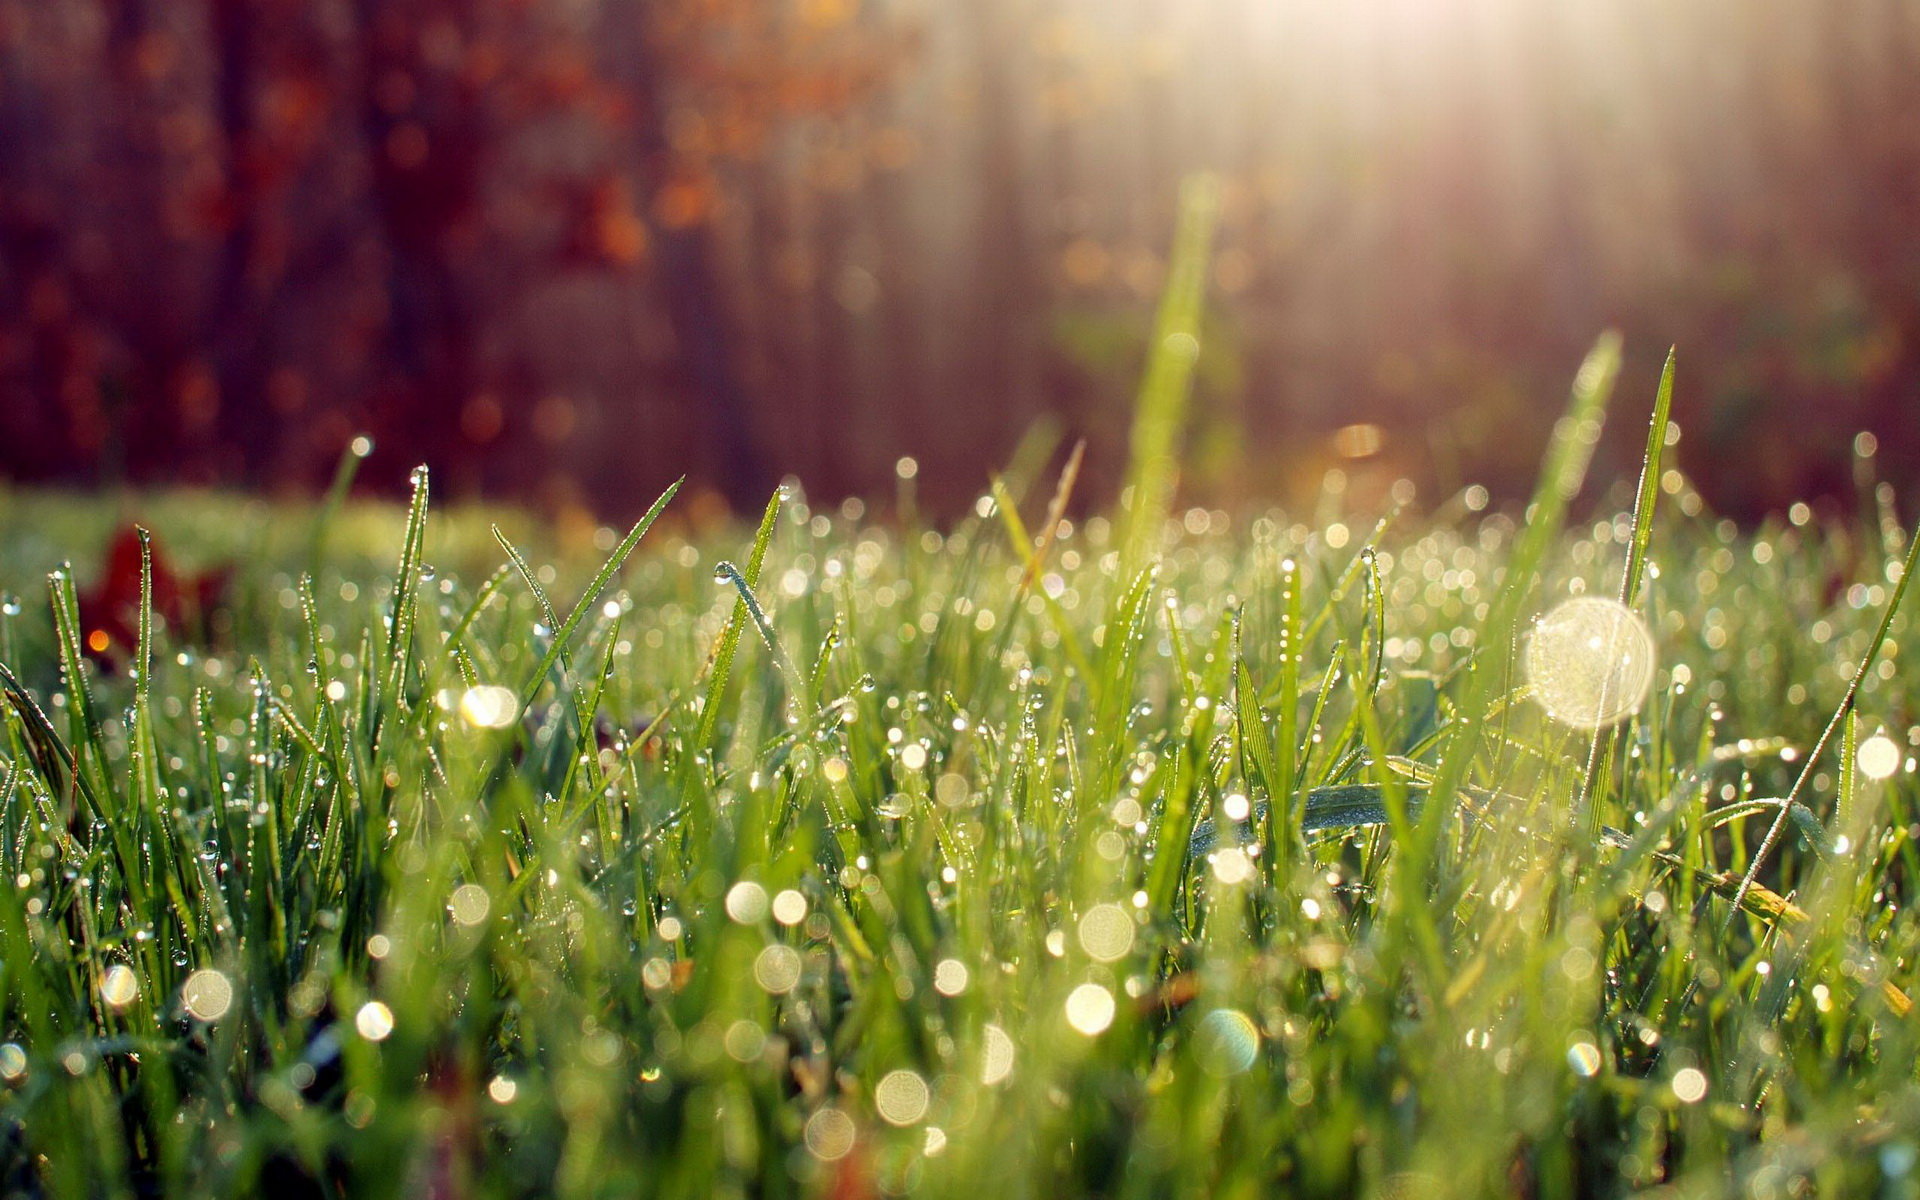 High Resolution Raindrops Hd Background Id - Early Morning Dew On Grass - HD Wallpaper 